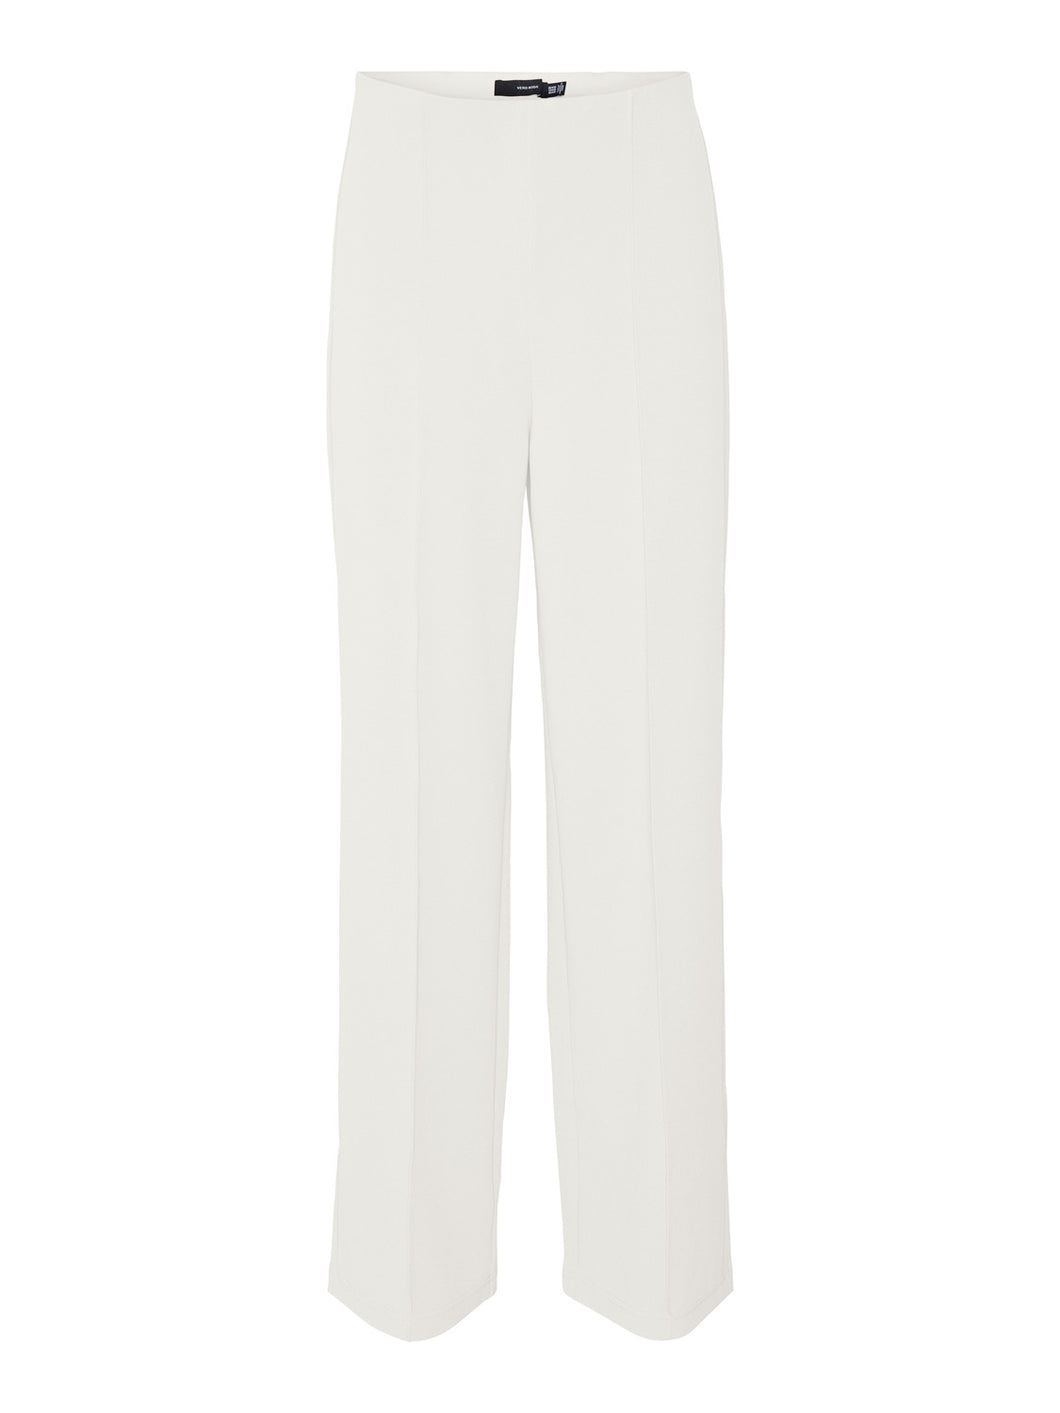 BECKY HR WIDE PULL ON PANT